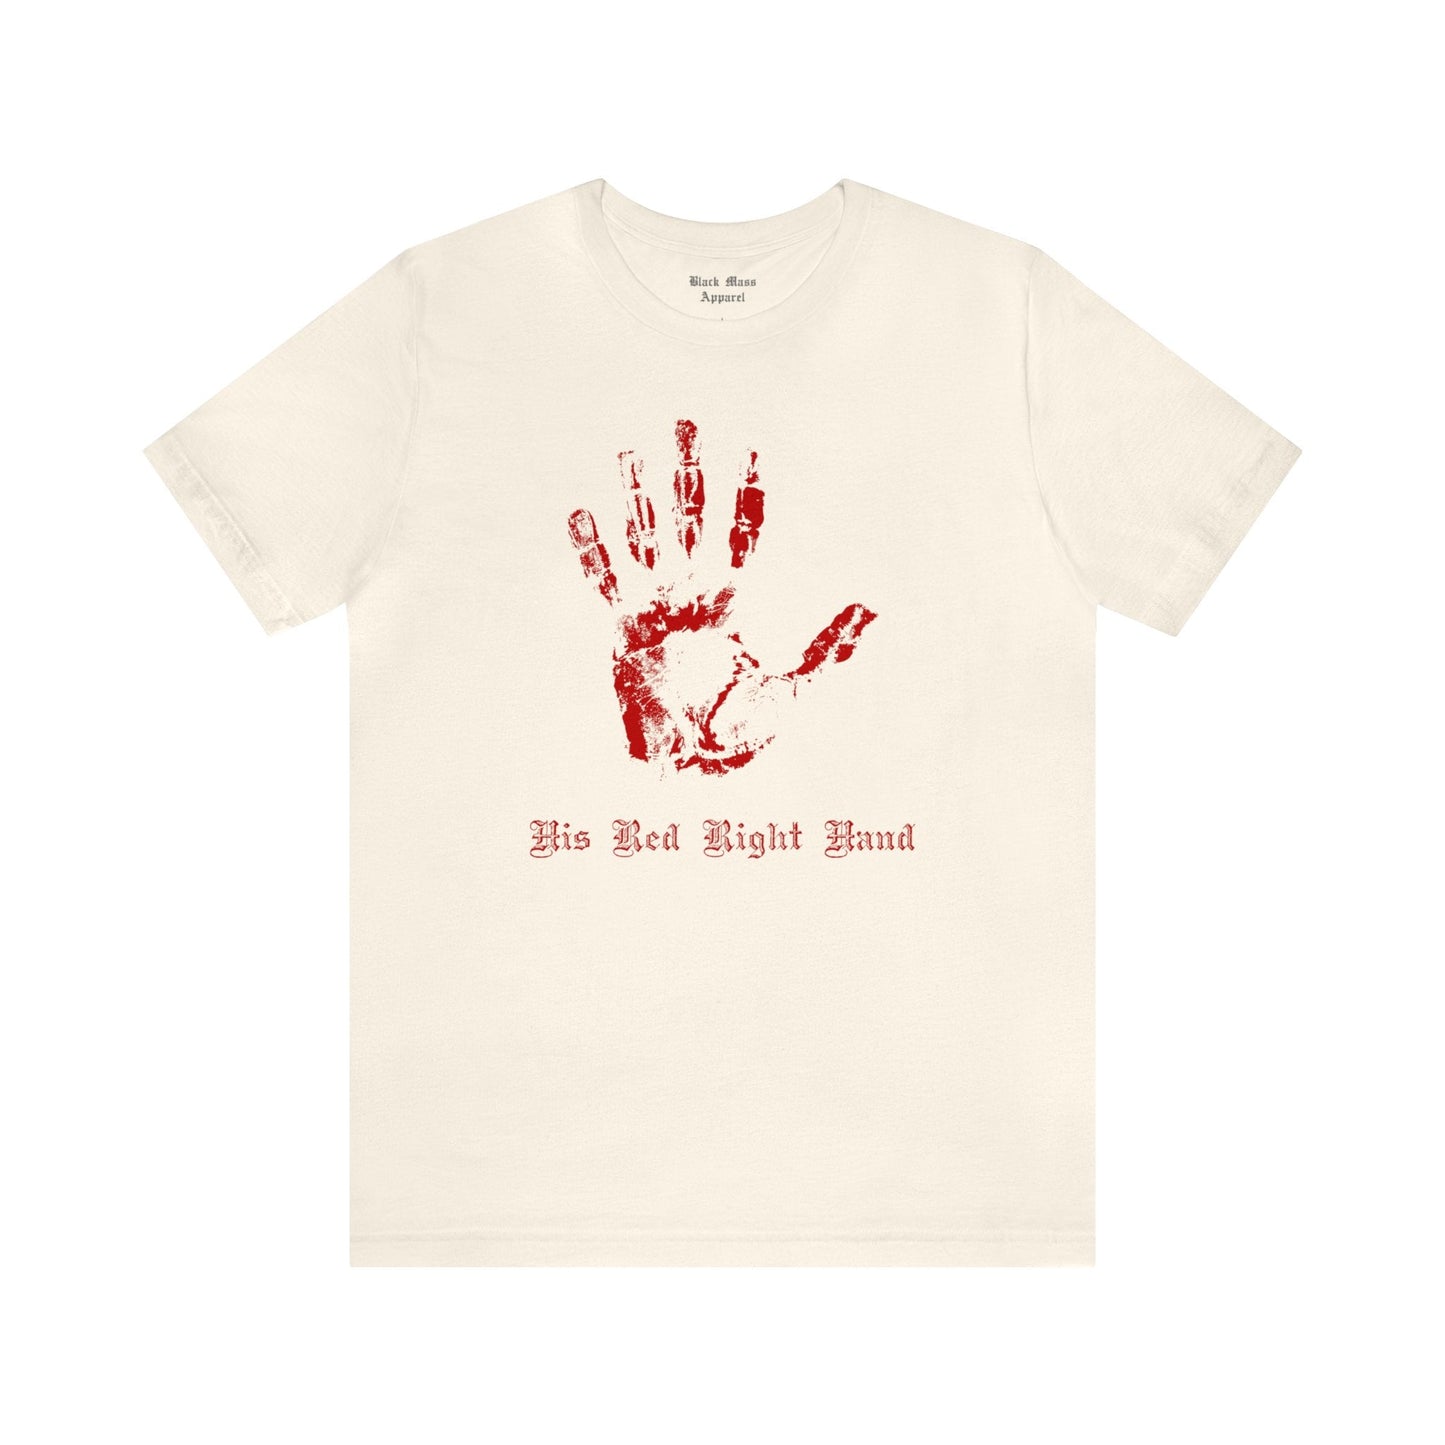 His Red Right Hand - Black Mass Apparel - T-Shirt